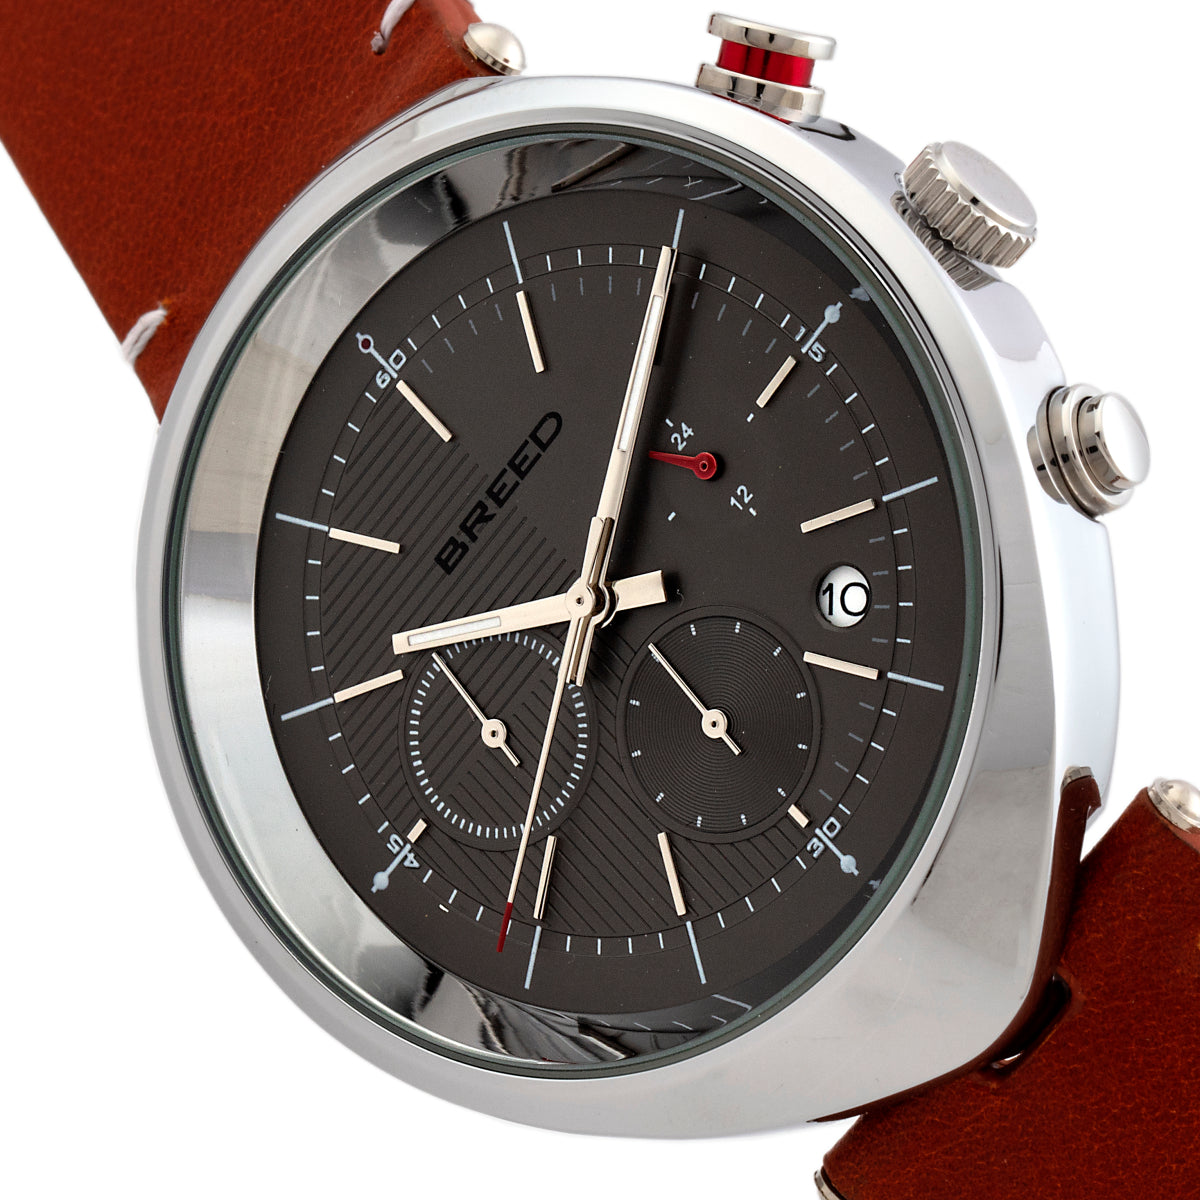 Breed Tempest Chronograph Leather-Band Watch w/Date - Brown/Grey - BRD8604